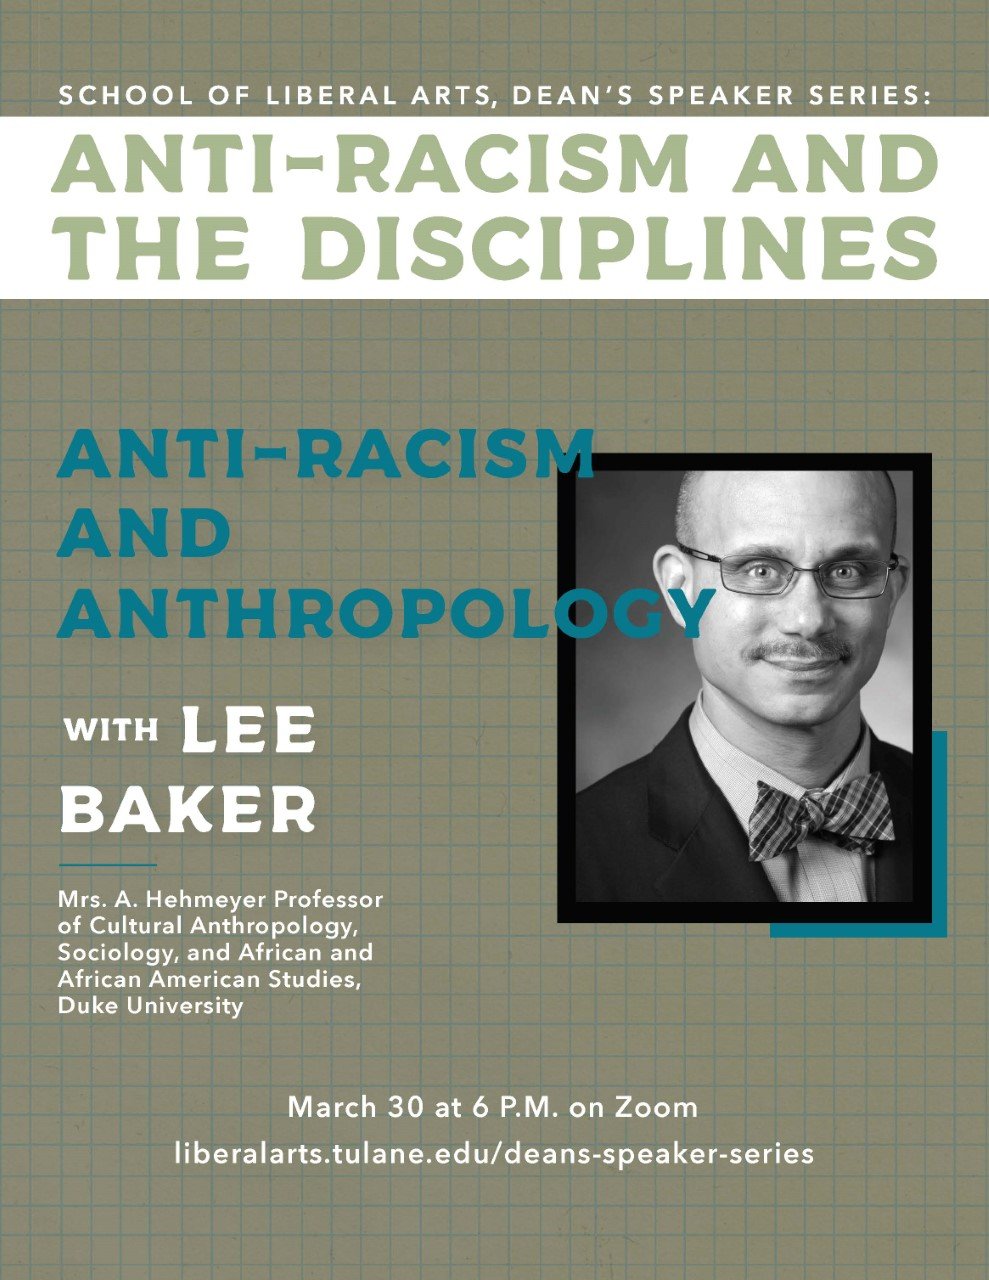 Dean’s Speaker Series, Anti-Racism and Anthropology, flyer